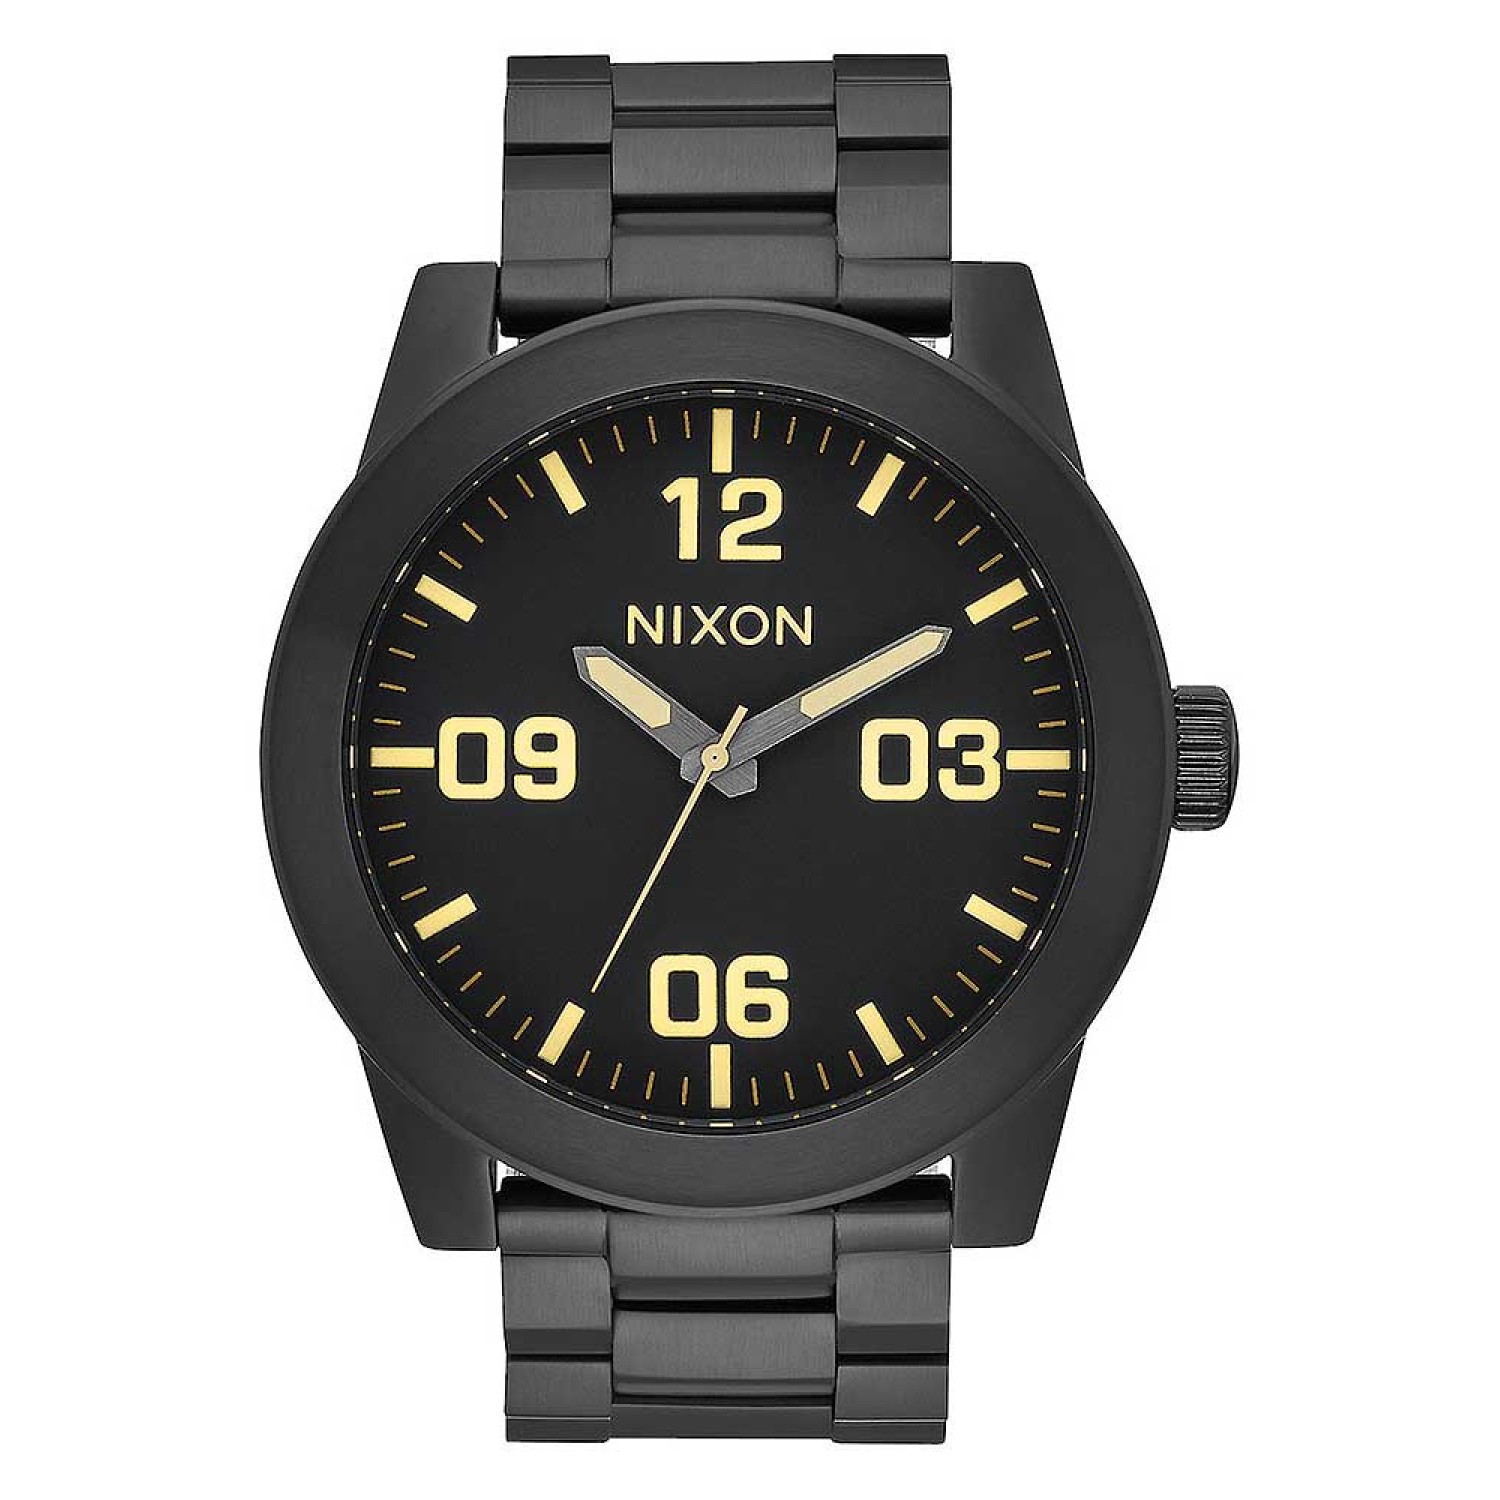 A3461256 NIXON Mens CORPORAL Black Watch. Rugged and functional, with a 48 mm case crafted with unique angles and lines2 Year  Guarantee 3 Months No Payments and Interest for Q Card holders This watch is pressure rated at 100 metres or 10bar. This makes i